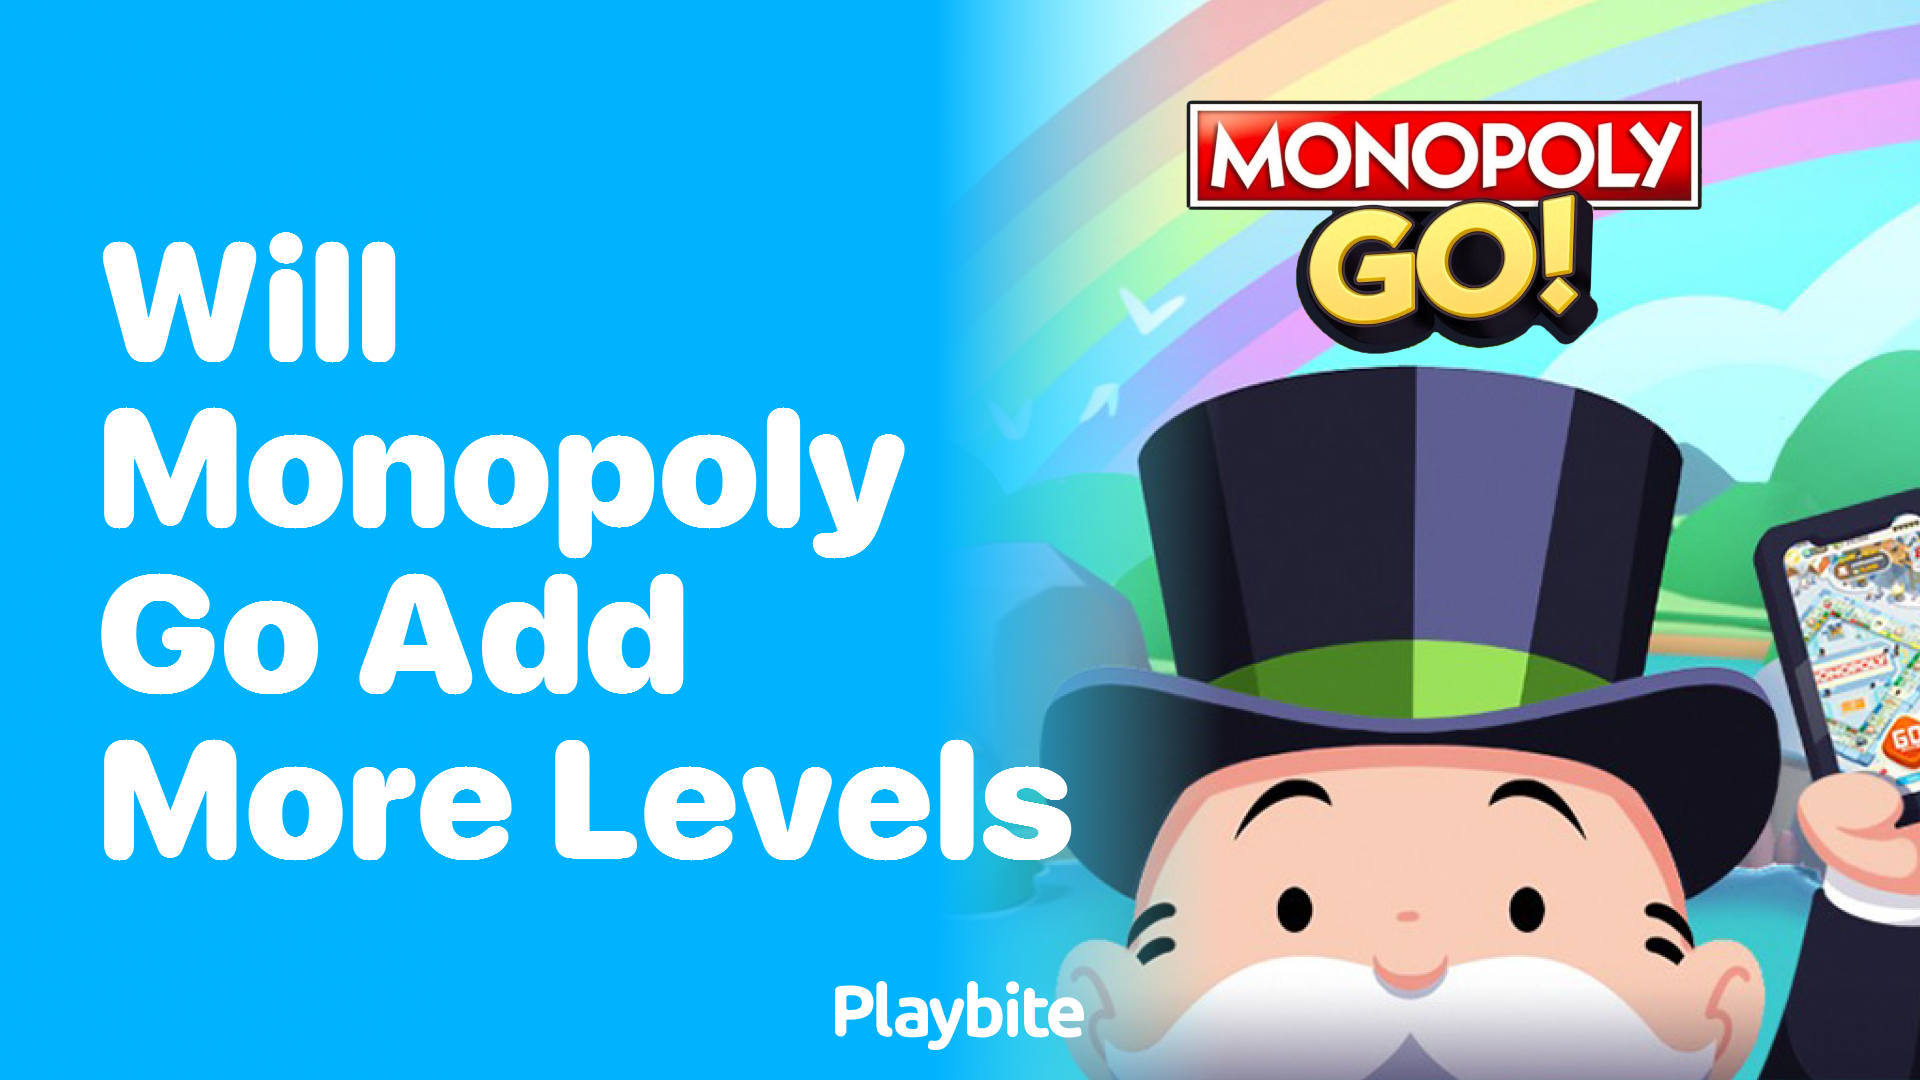 Will Monopoly Go Add More Levels?